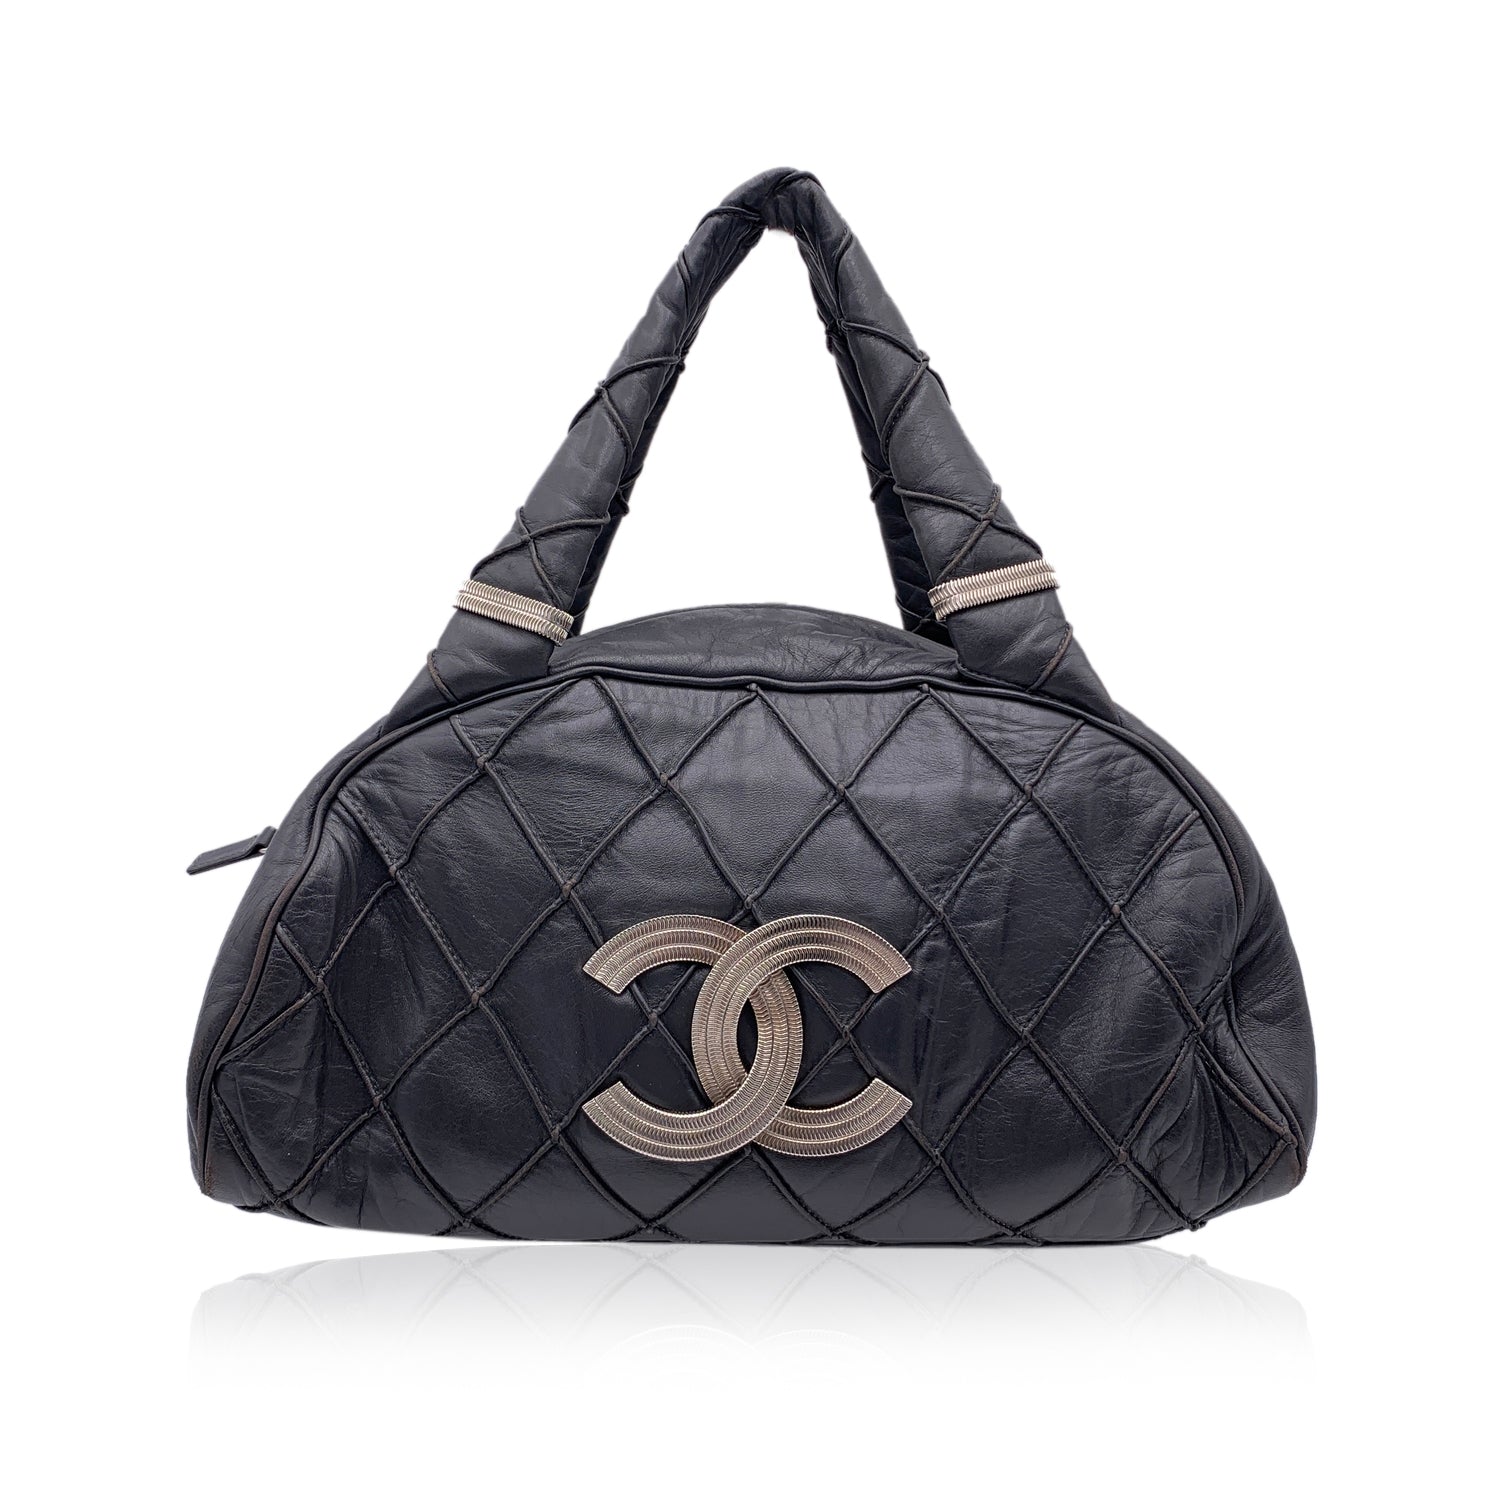 CHANEL Dark Grey Quilted Leather Cc Logo Bowling Bowler Bag